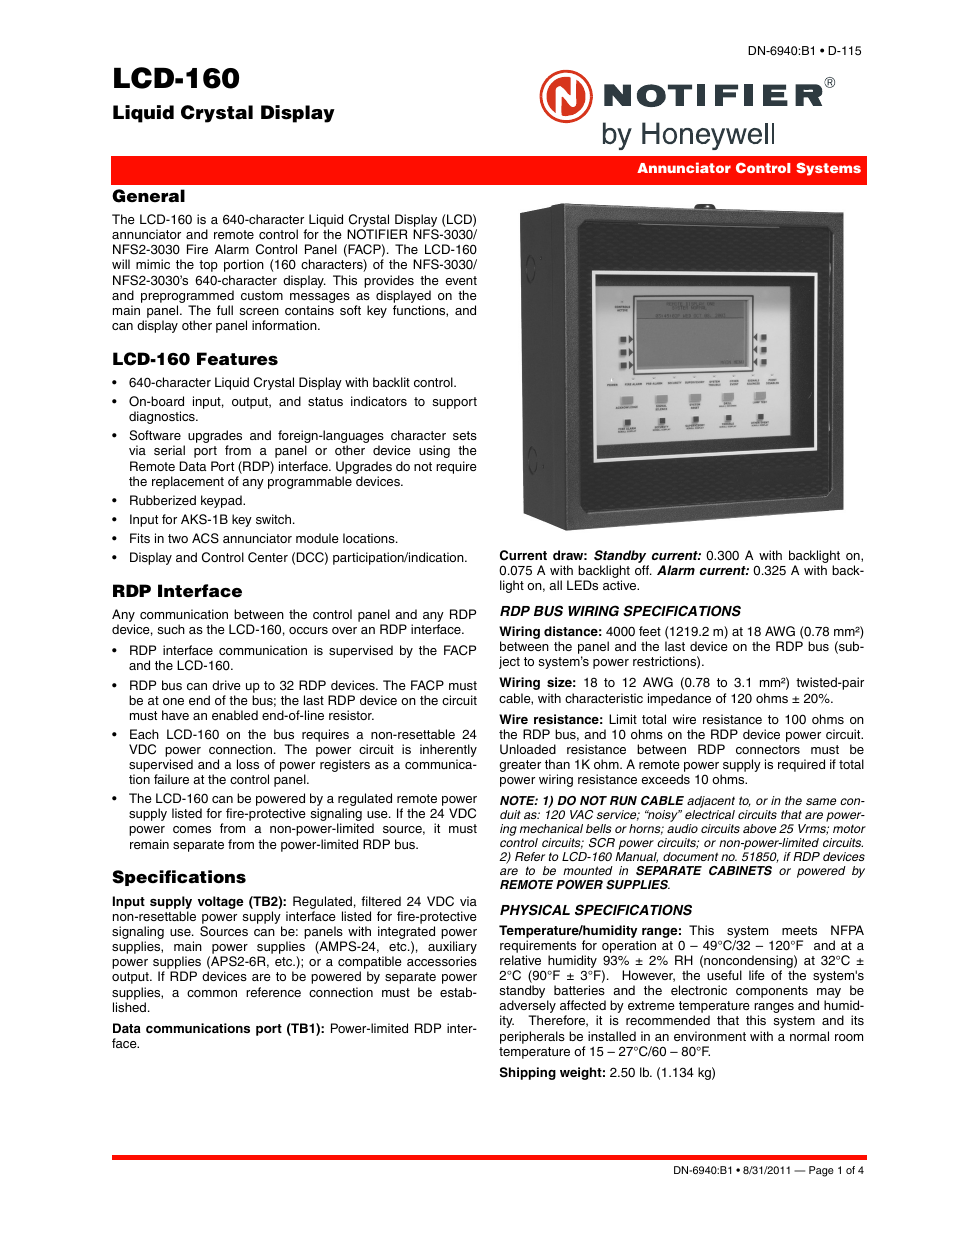 Notifier LCD-160 User Manual | 4 pages